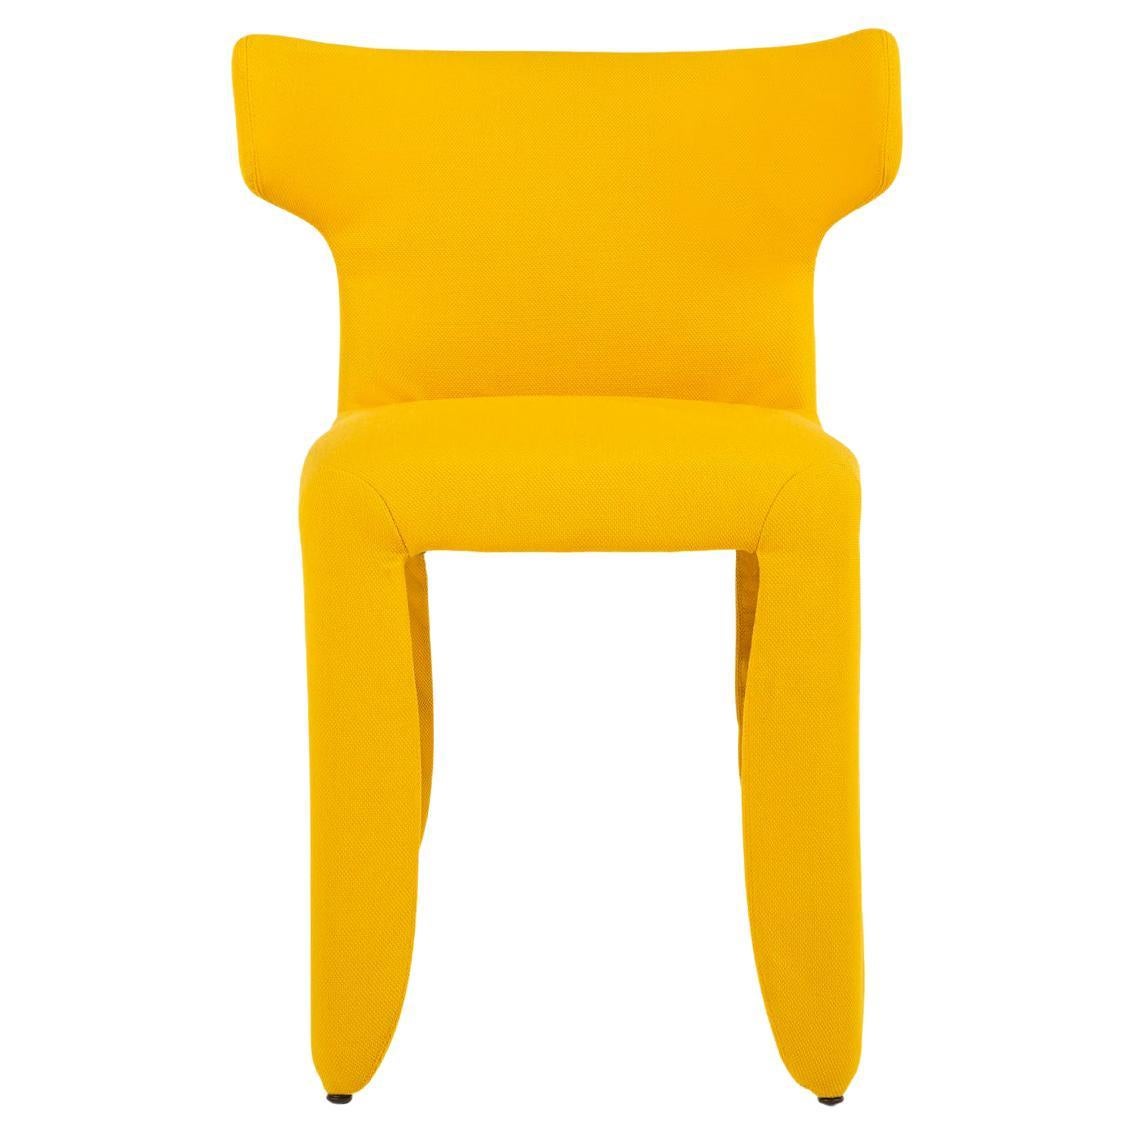 Moooi Monster Naked Chair with Arms in Steelcut Trio 3, 446 Yellow Upholstery For Sale